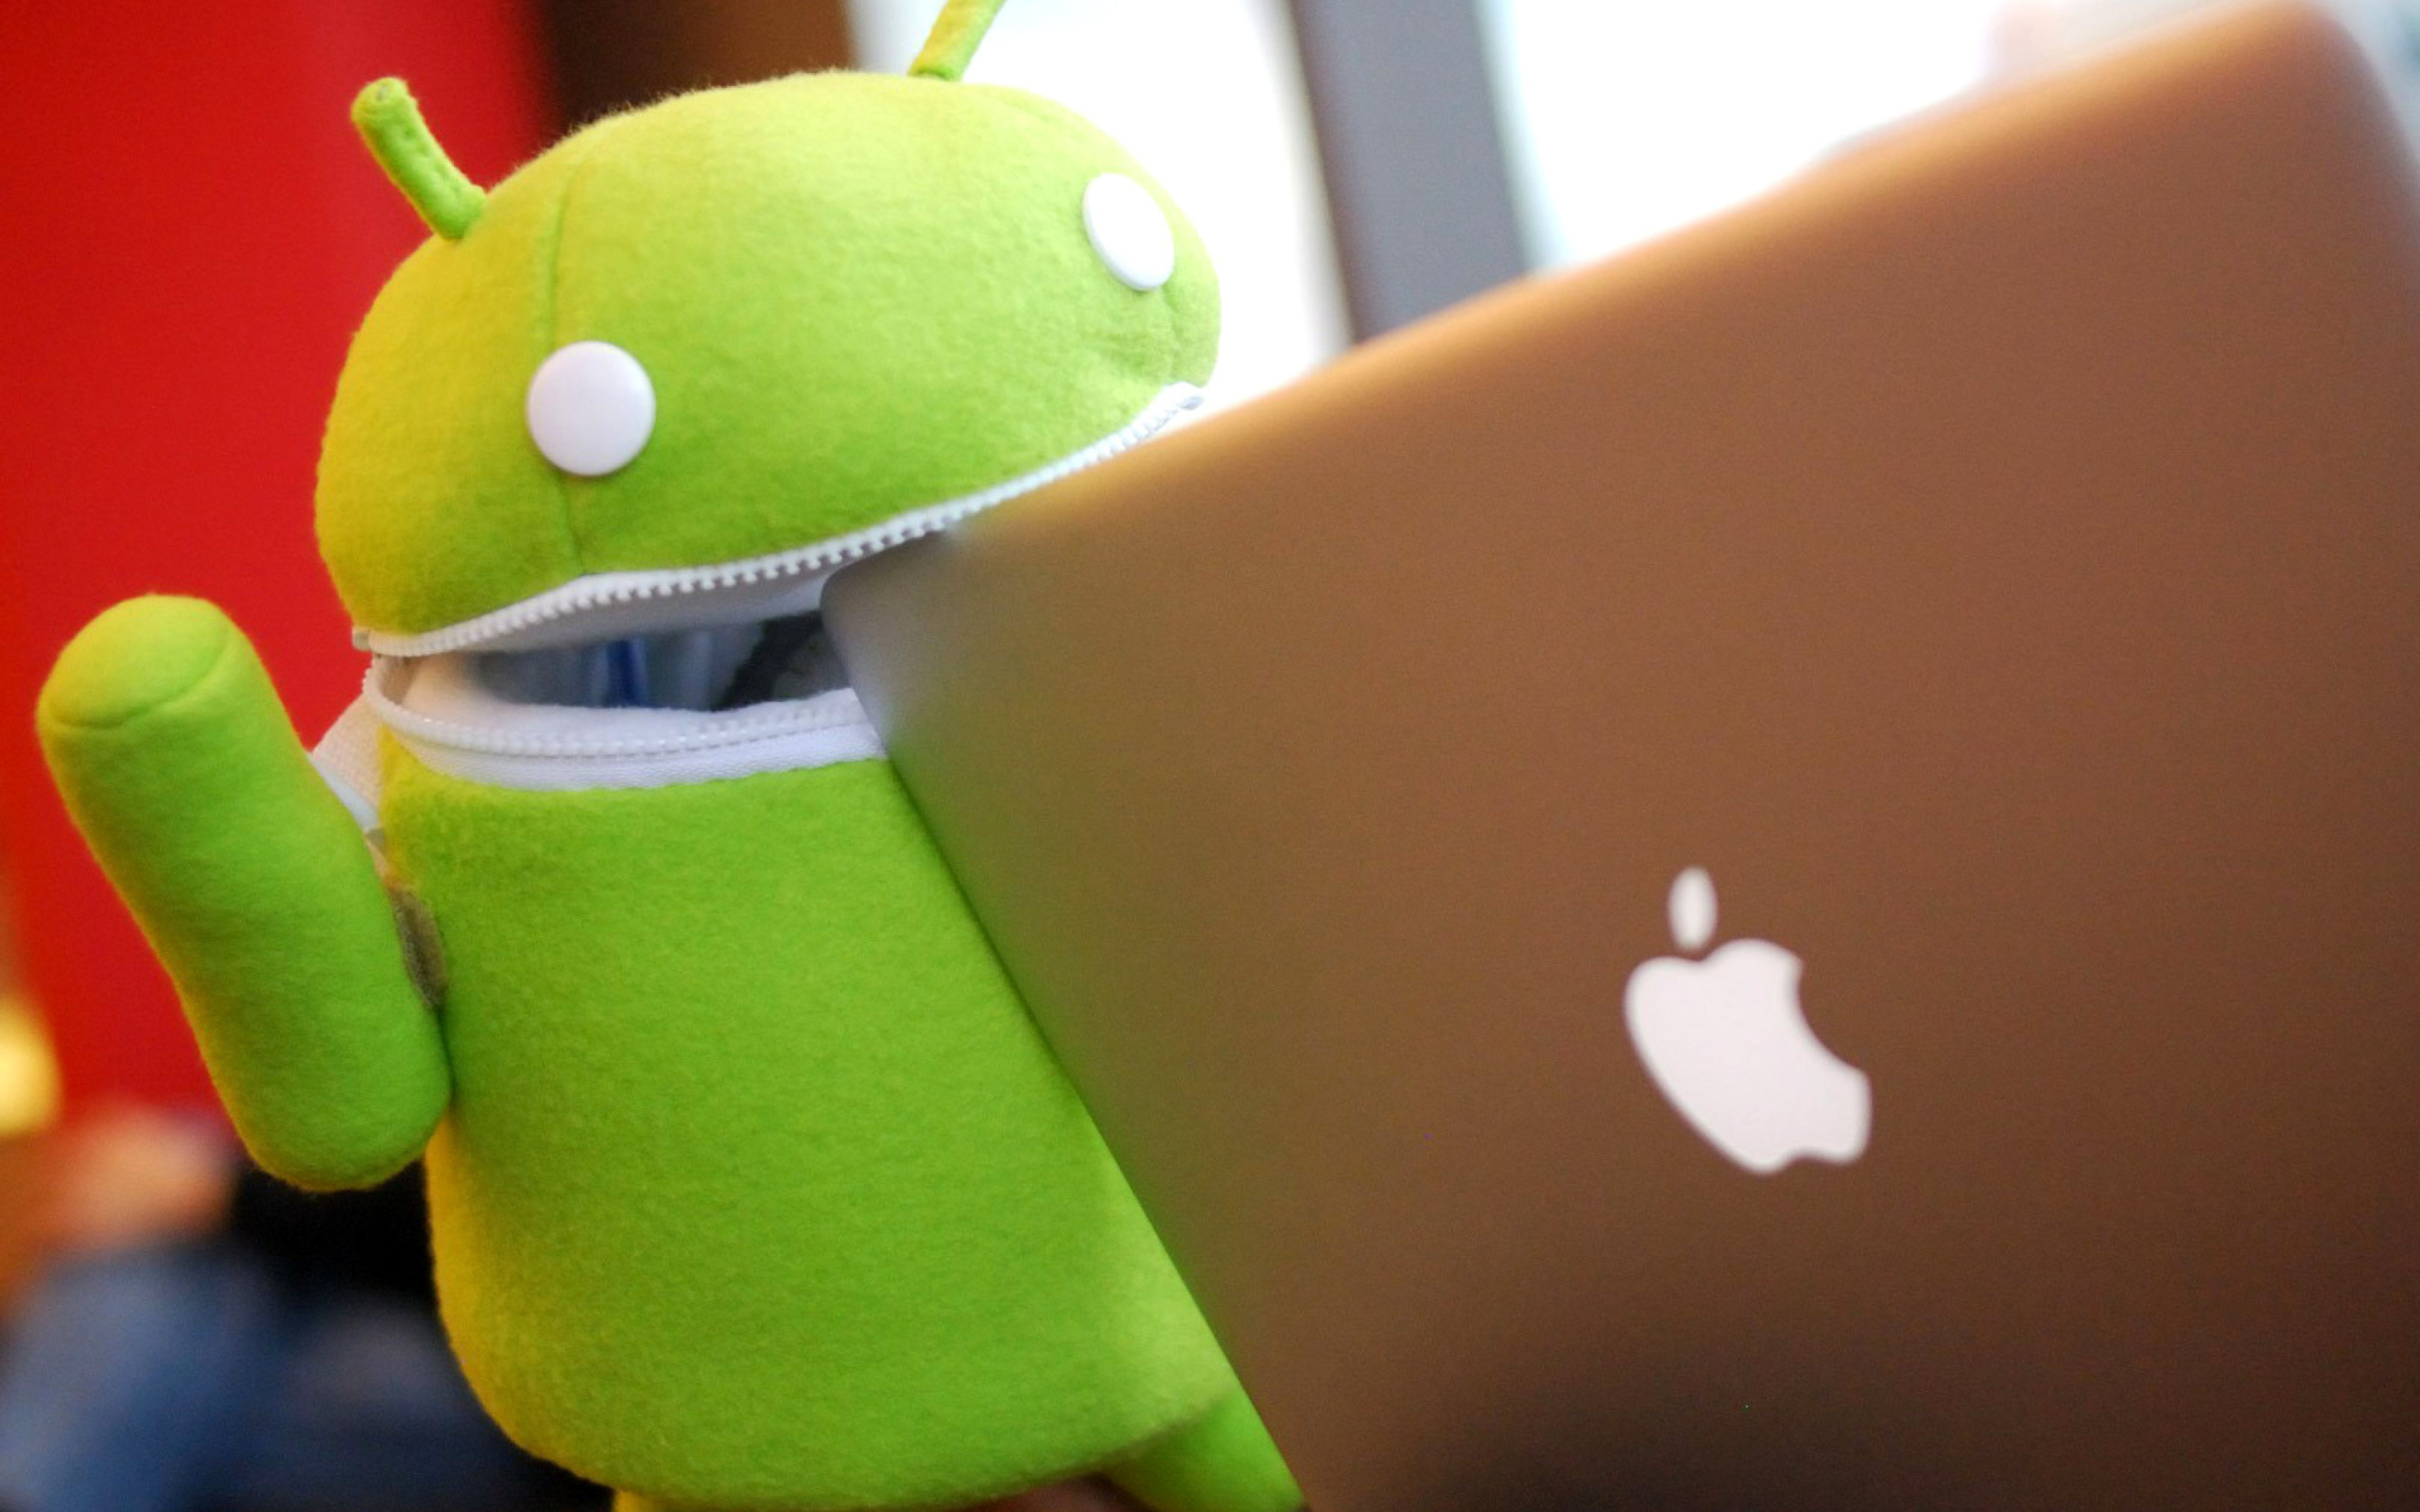 Android Robot and Apple MacBook Air Laptop wallpaper 2560x1600